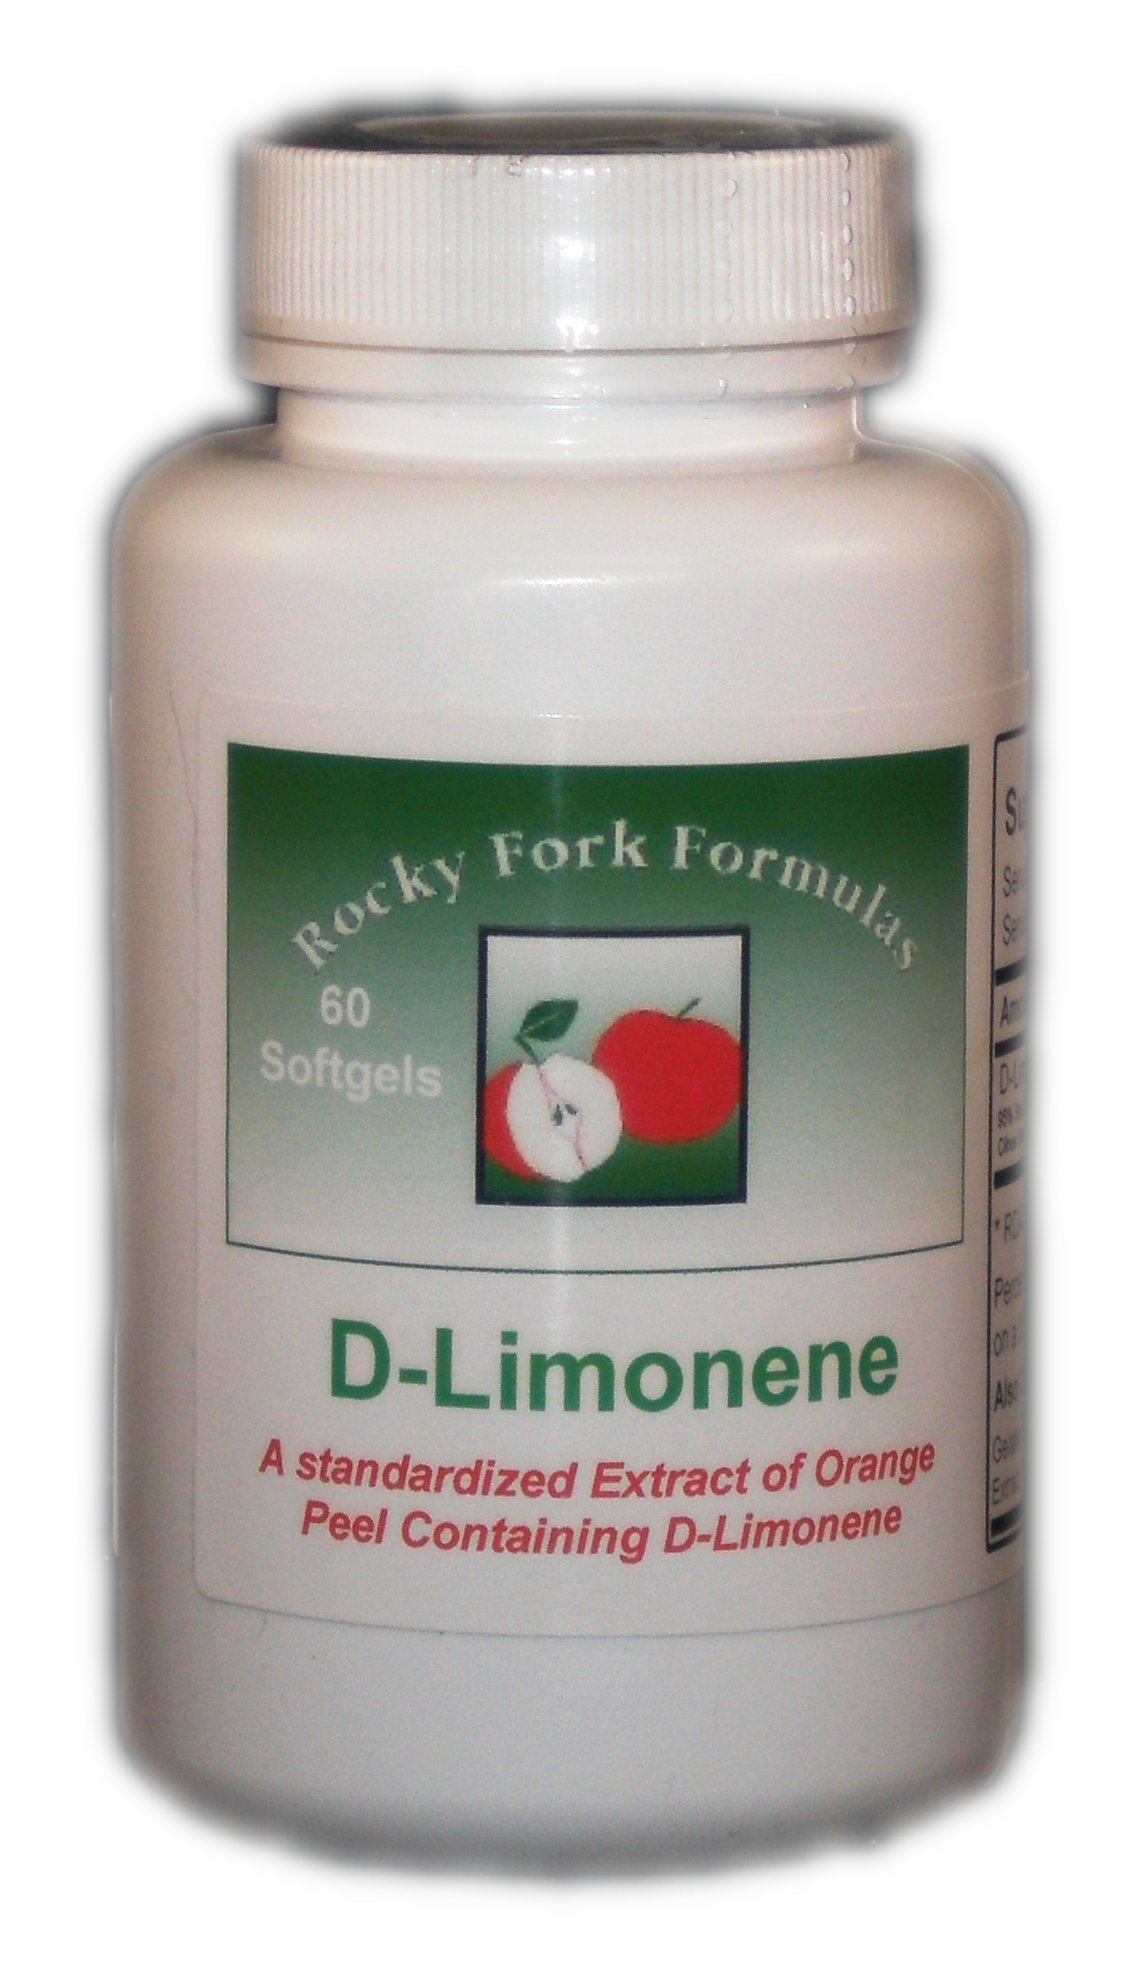 New D-Limonene Product Now Available! | Rocky Fork Formulas, Inc.